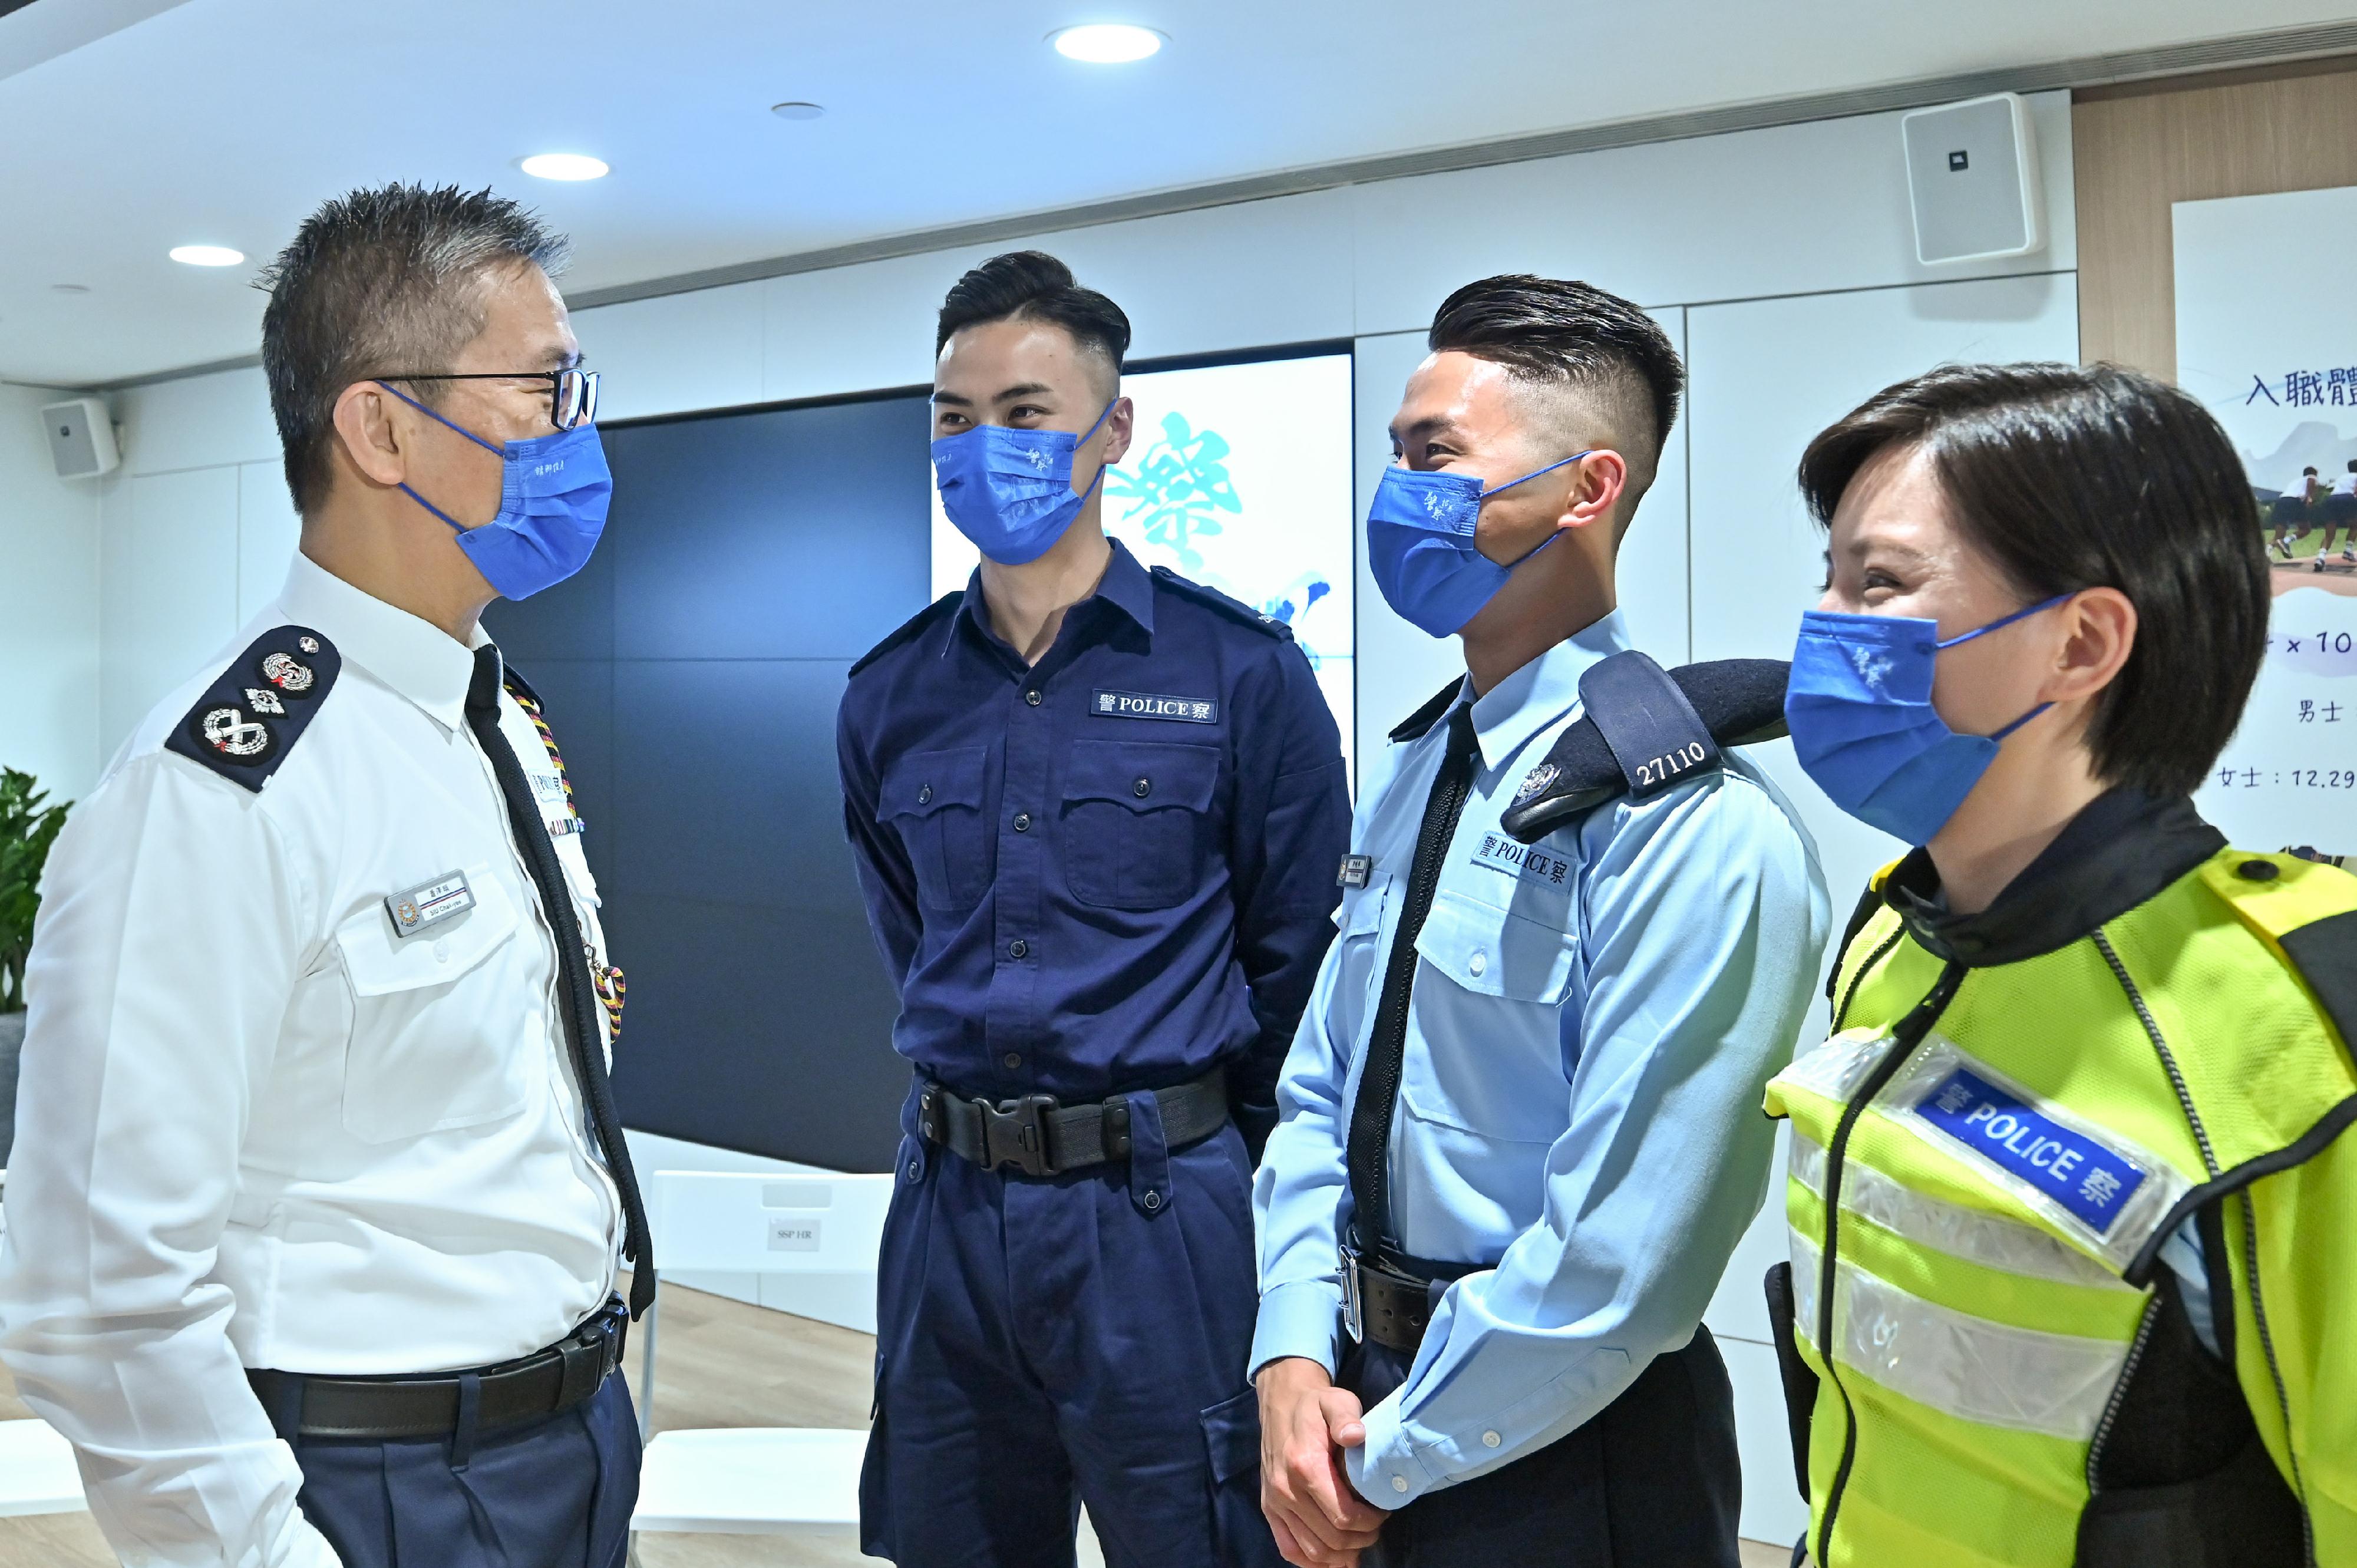 The Police Recruitment Centre officially opened today (October 27). Photo shows the Commissioner of Police, Mr Siu Chak-yee (first left), touring the Recruitment Centre and chatting with the "Recruitment Spokespersons" to learn more about its facilities.